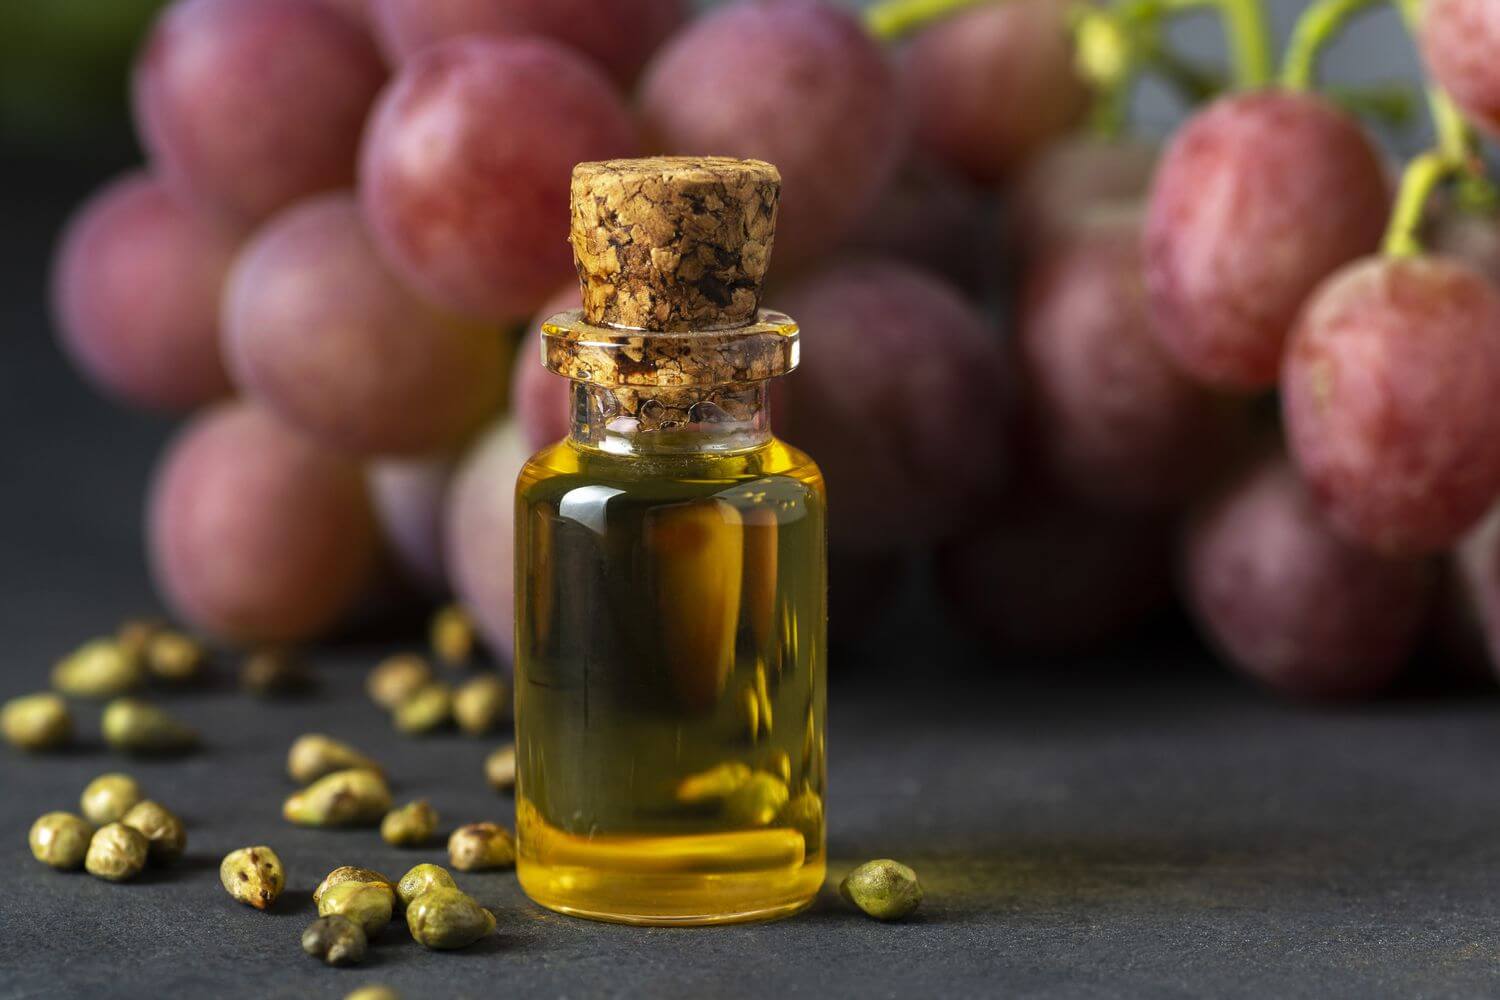 The Surprising Health Benefits of Grapeseed Oil